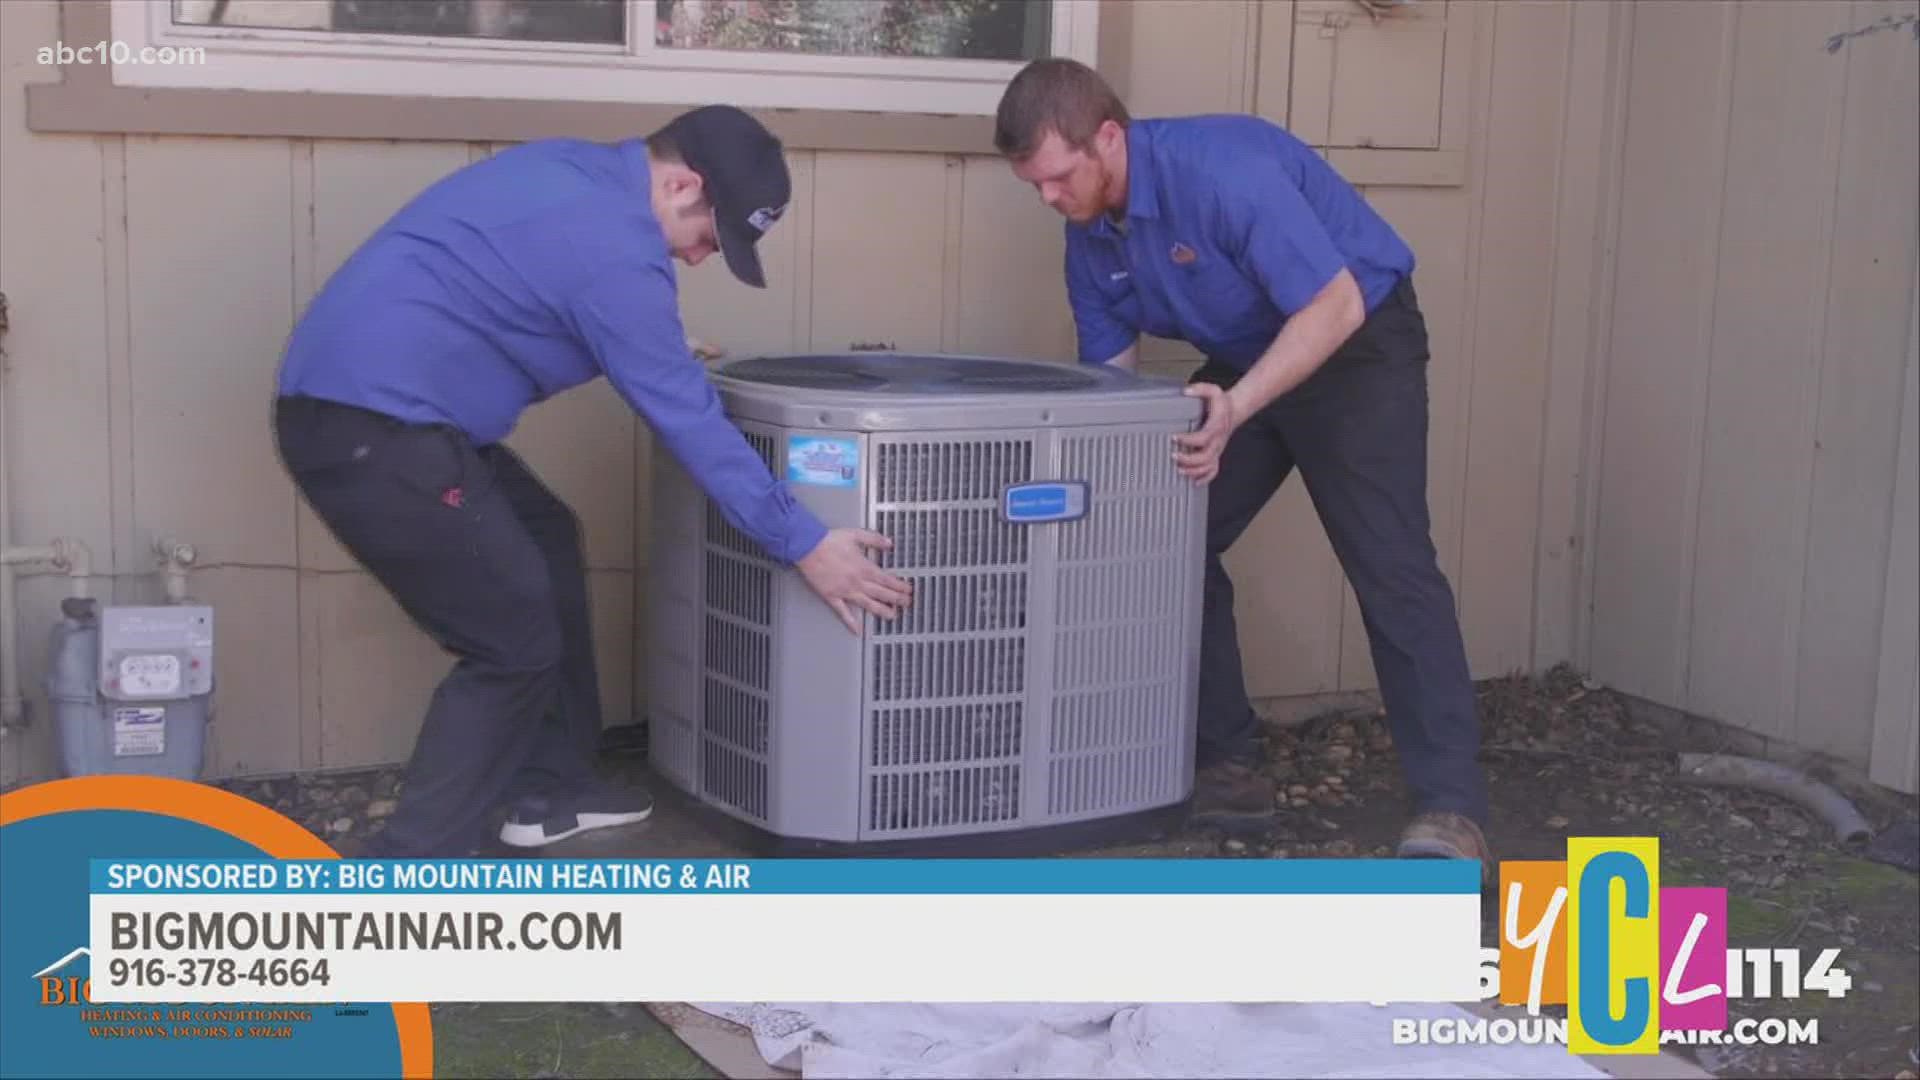 This fall, prepare for winter weather by having your HVAC system maintained with this special YCL offer. This segment paid for by Big Mountain Heating & Air.